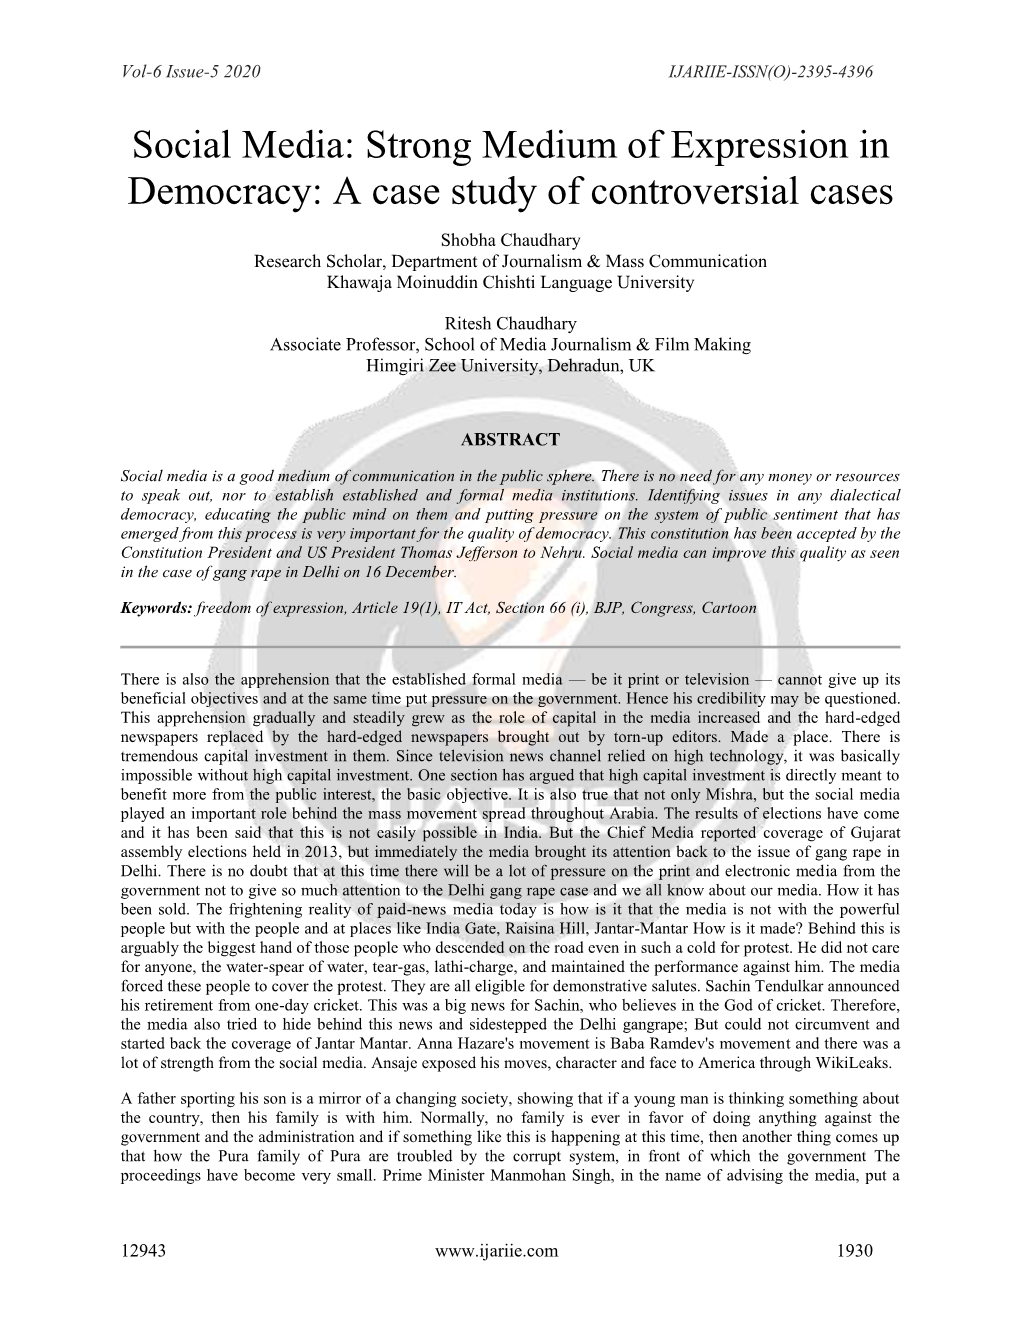 Social Media: Strong Medium of Expression in Democracy: a Case Study of Controversial Cases